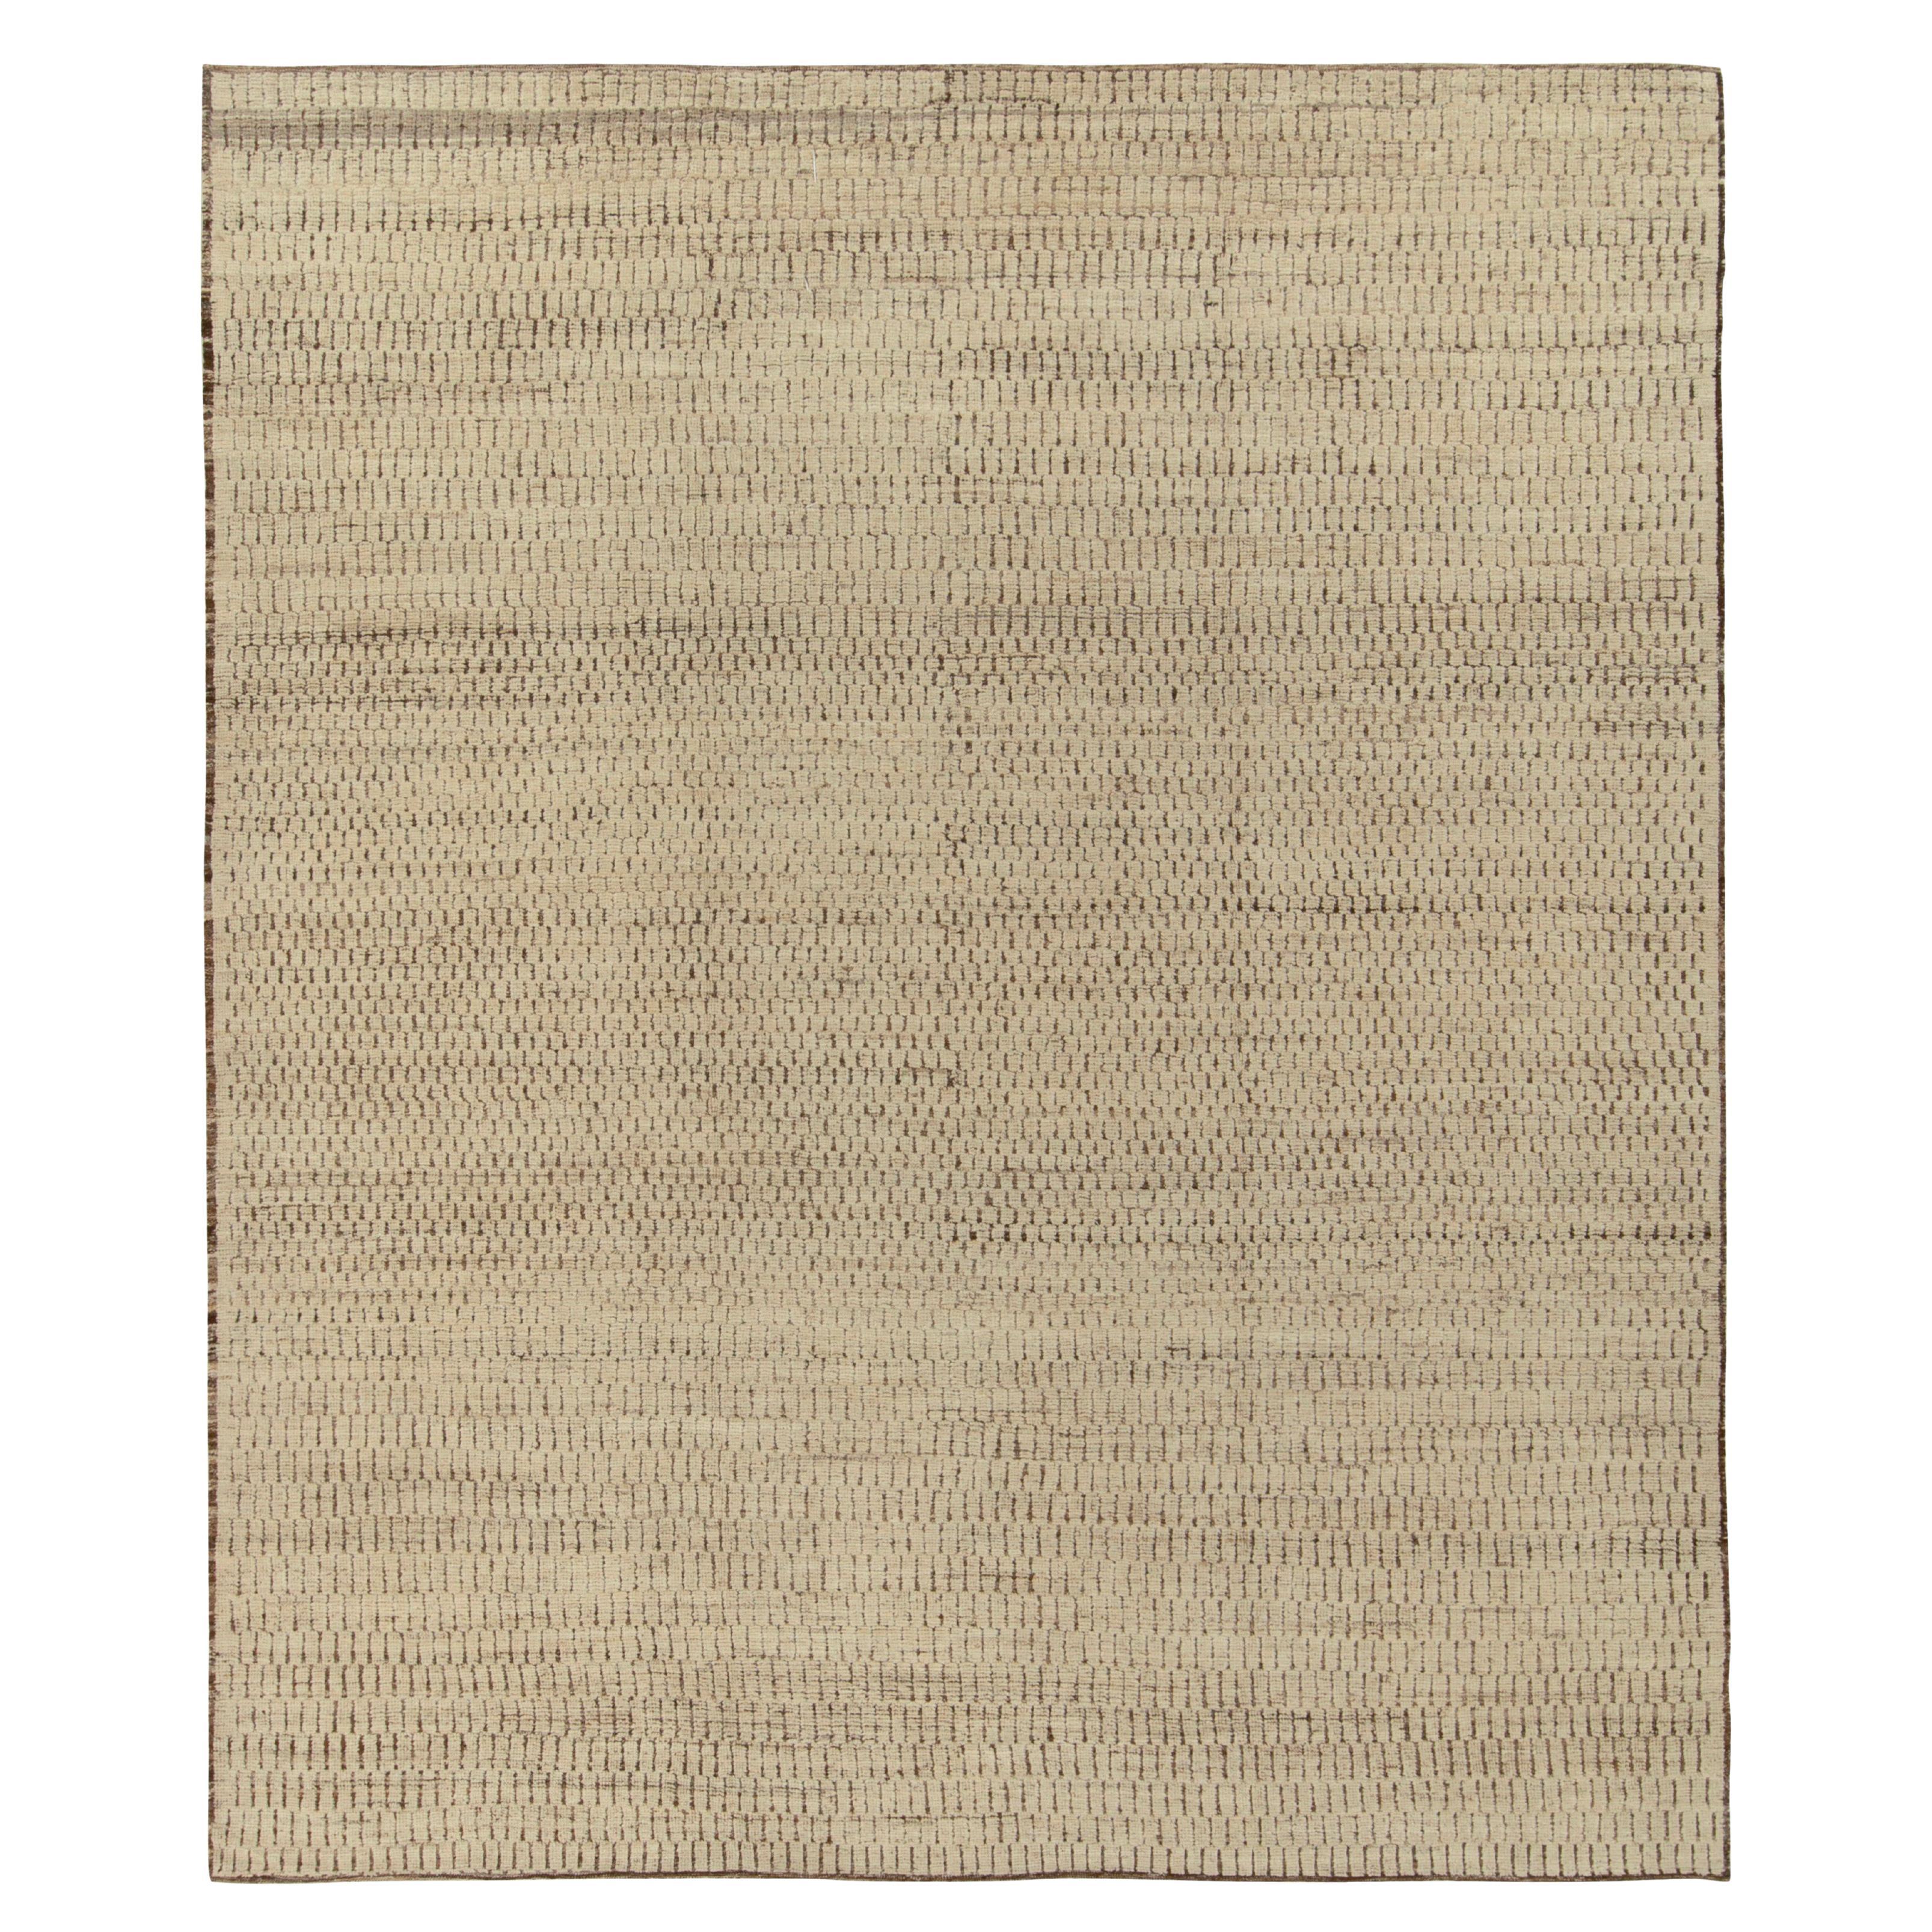 Rug & Kilim's Contemporary Moroccan Style Rug in Beige and Brown